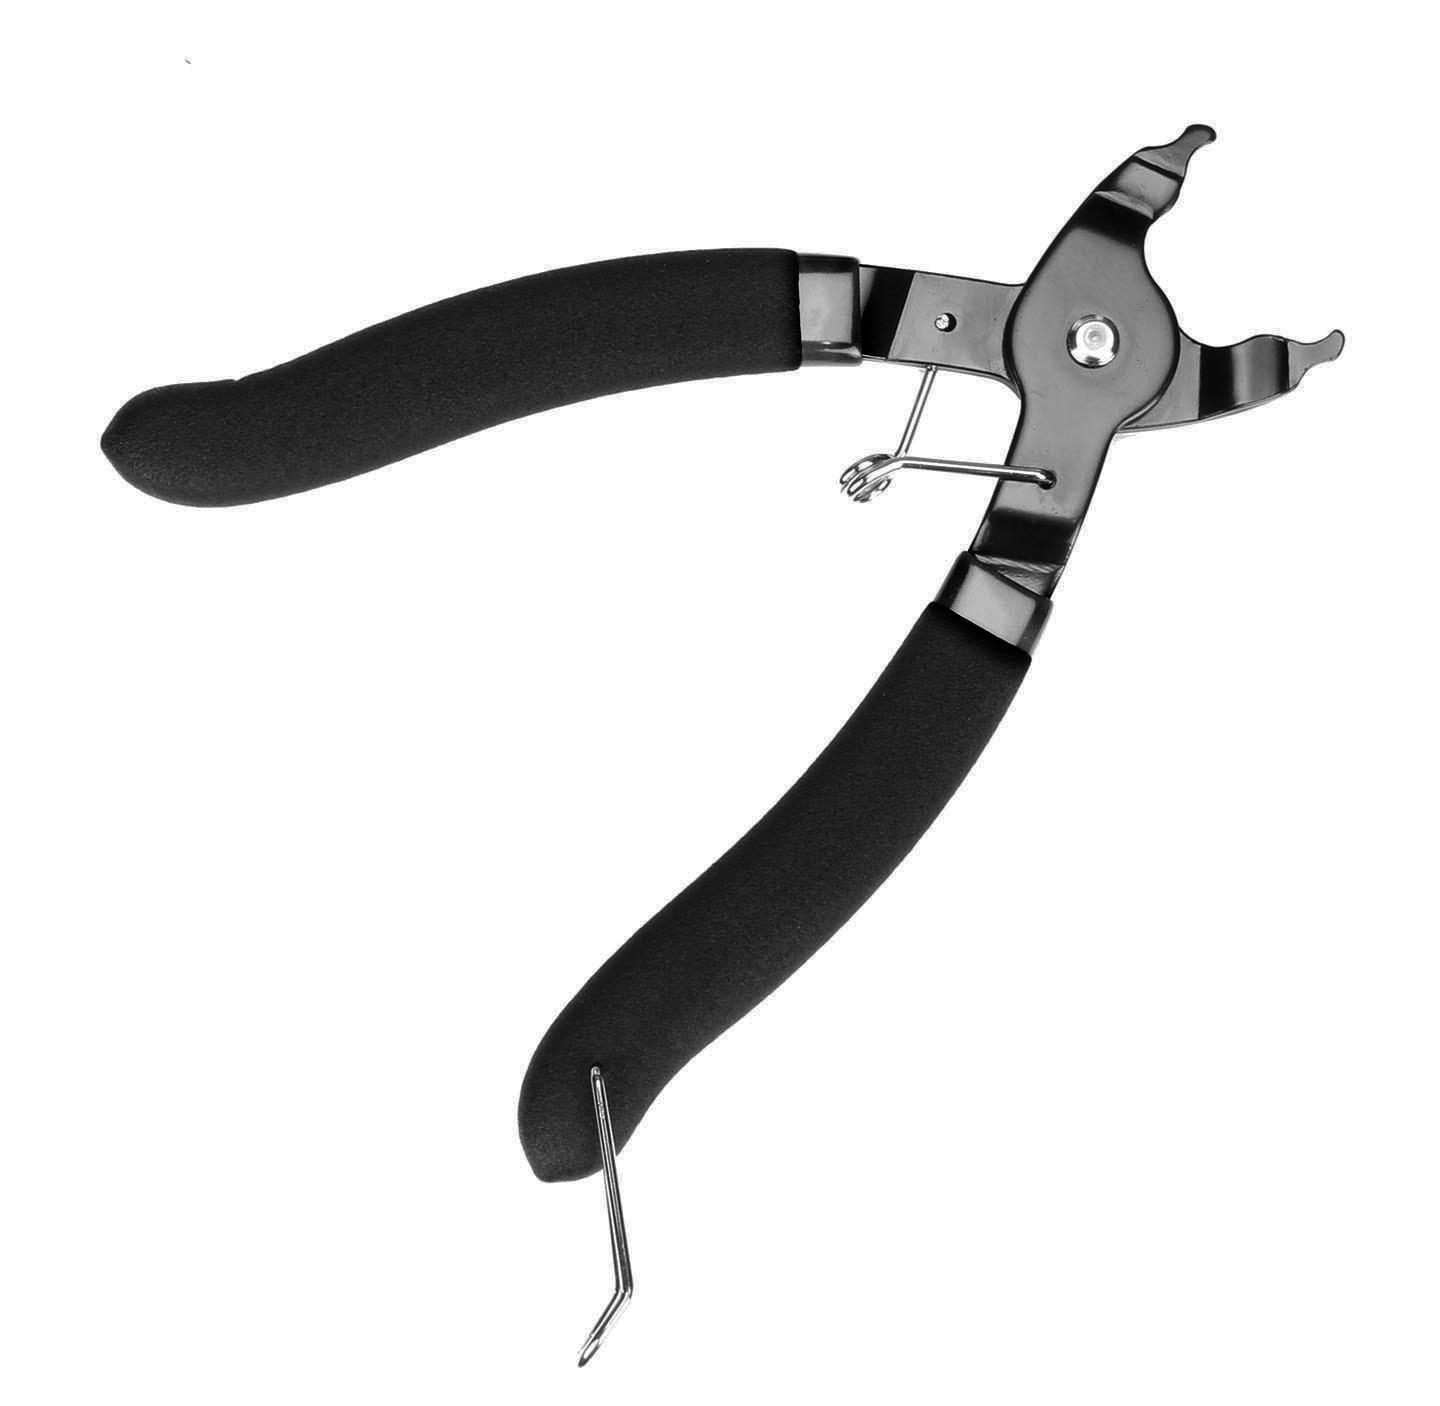 Quick Link Pliers